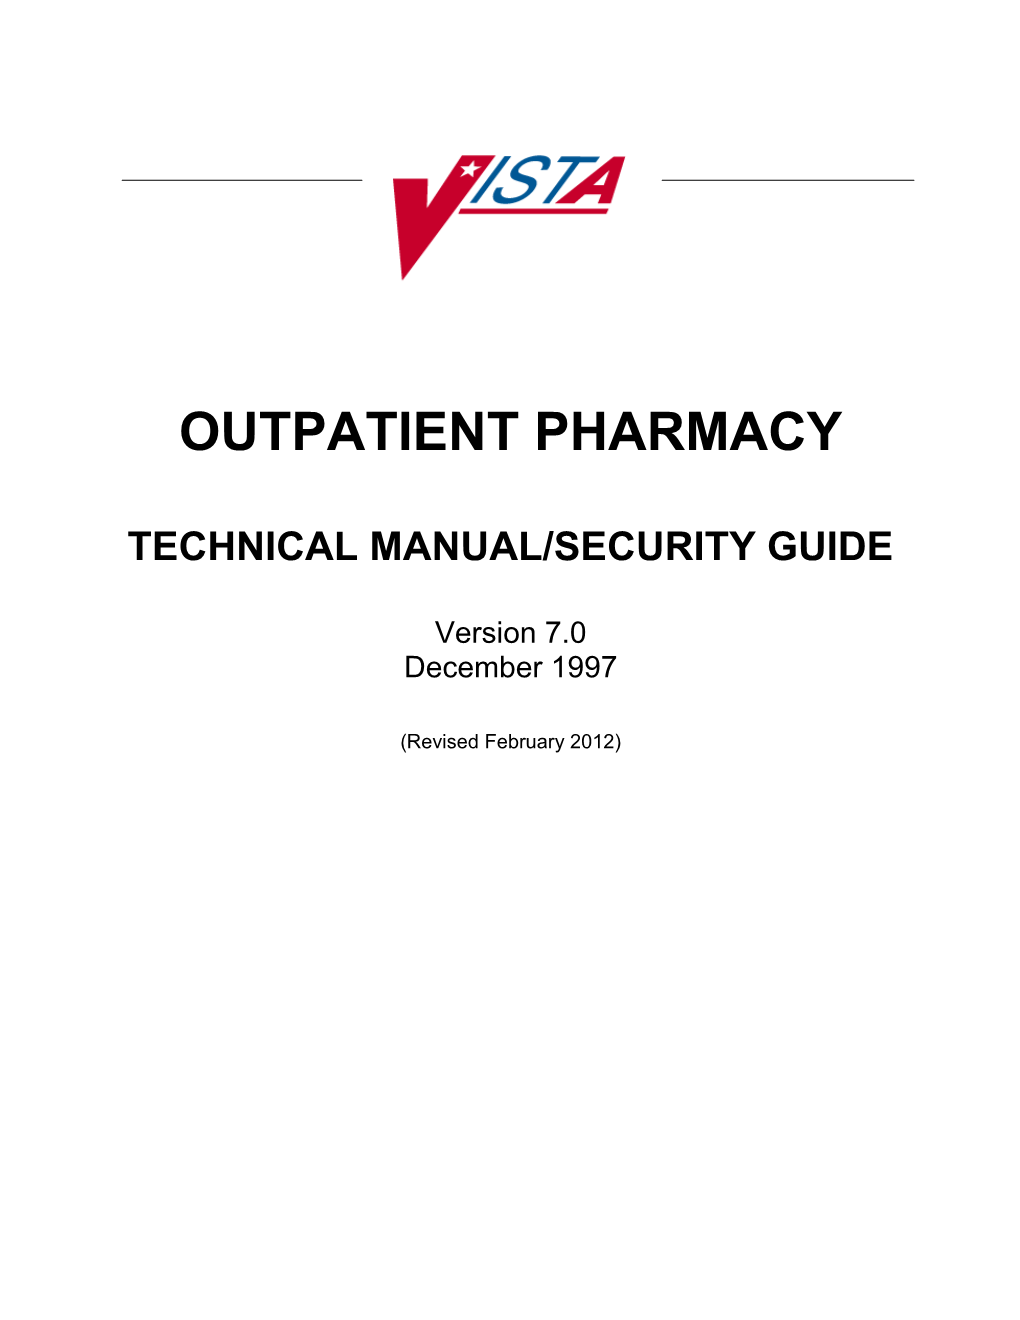 Department of Veterans Affairs Outpatient Pharmacy Technical Manual/Security Guide V. 7